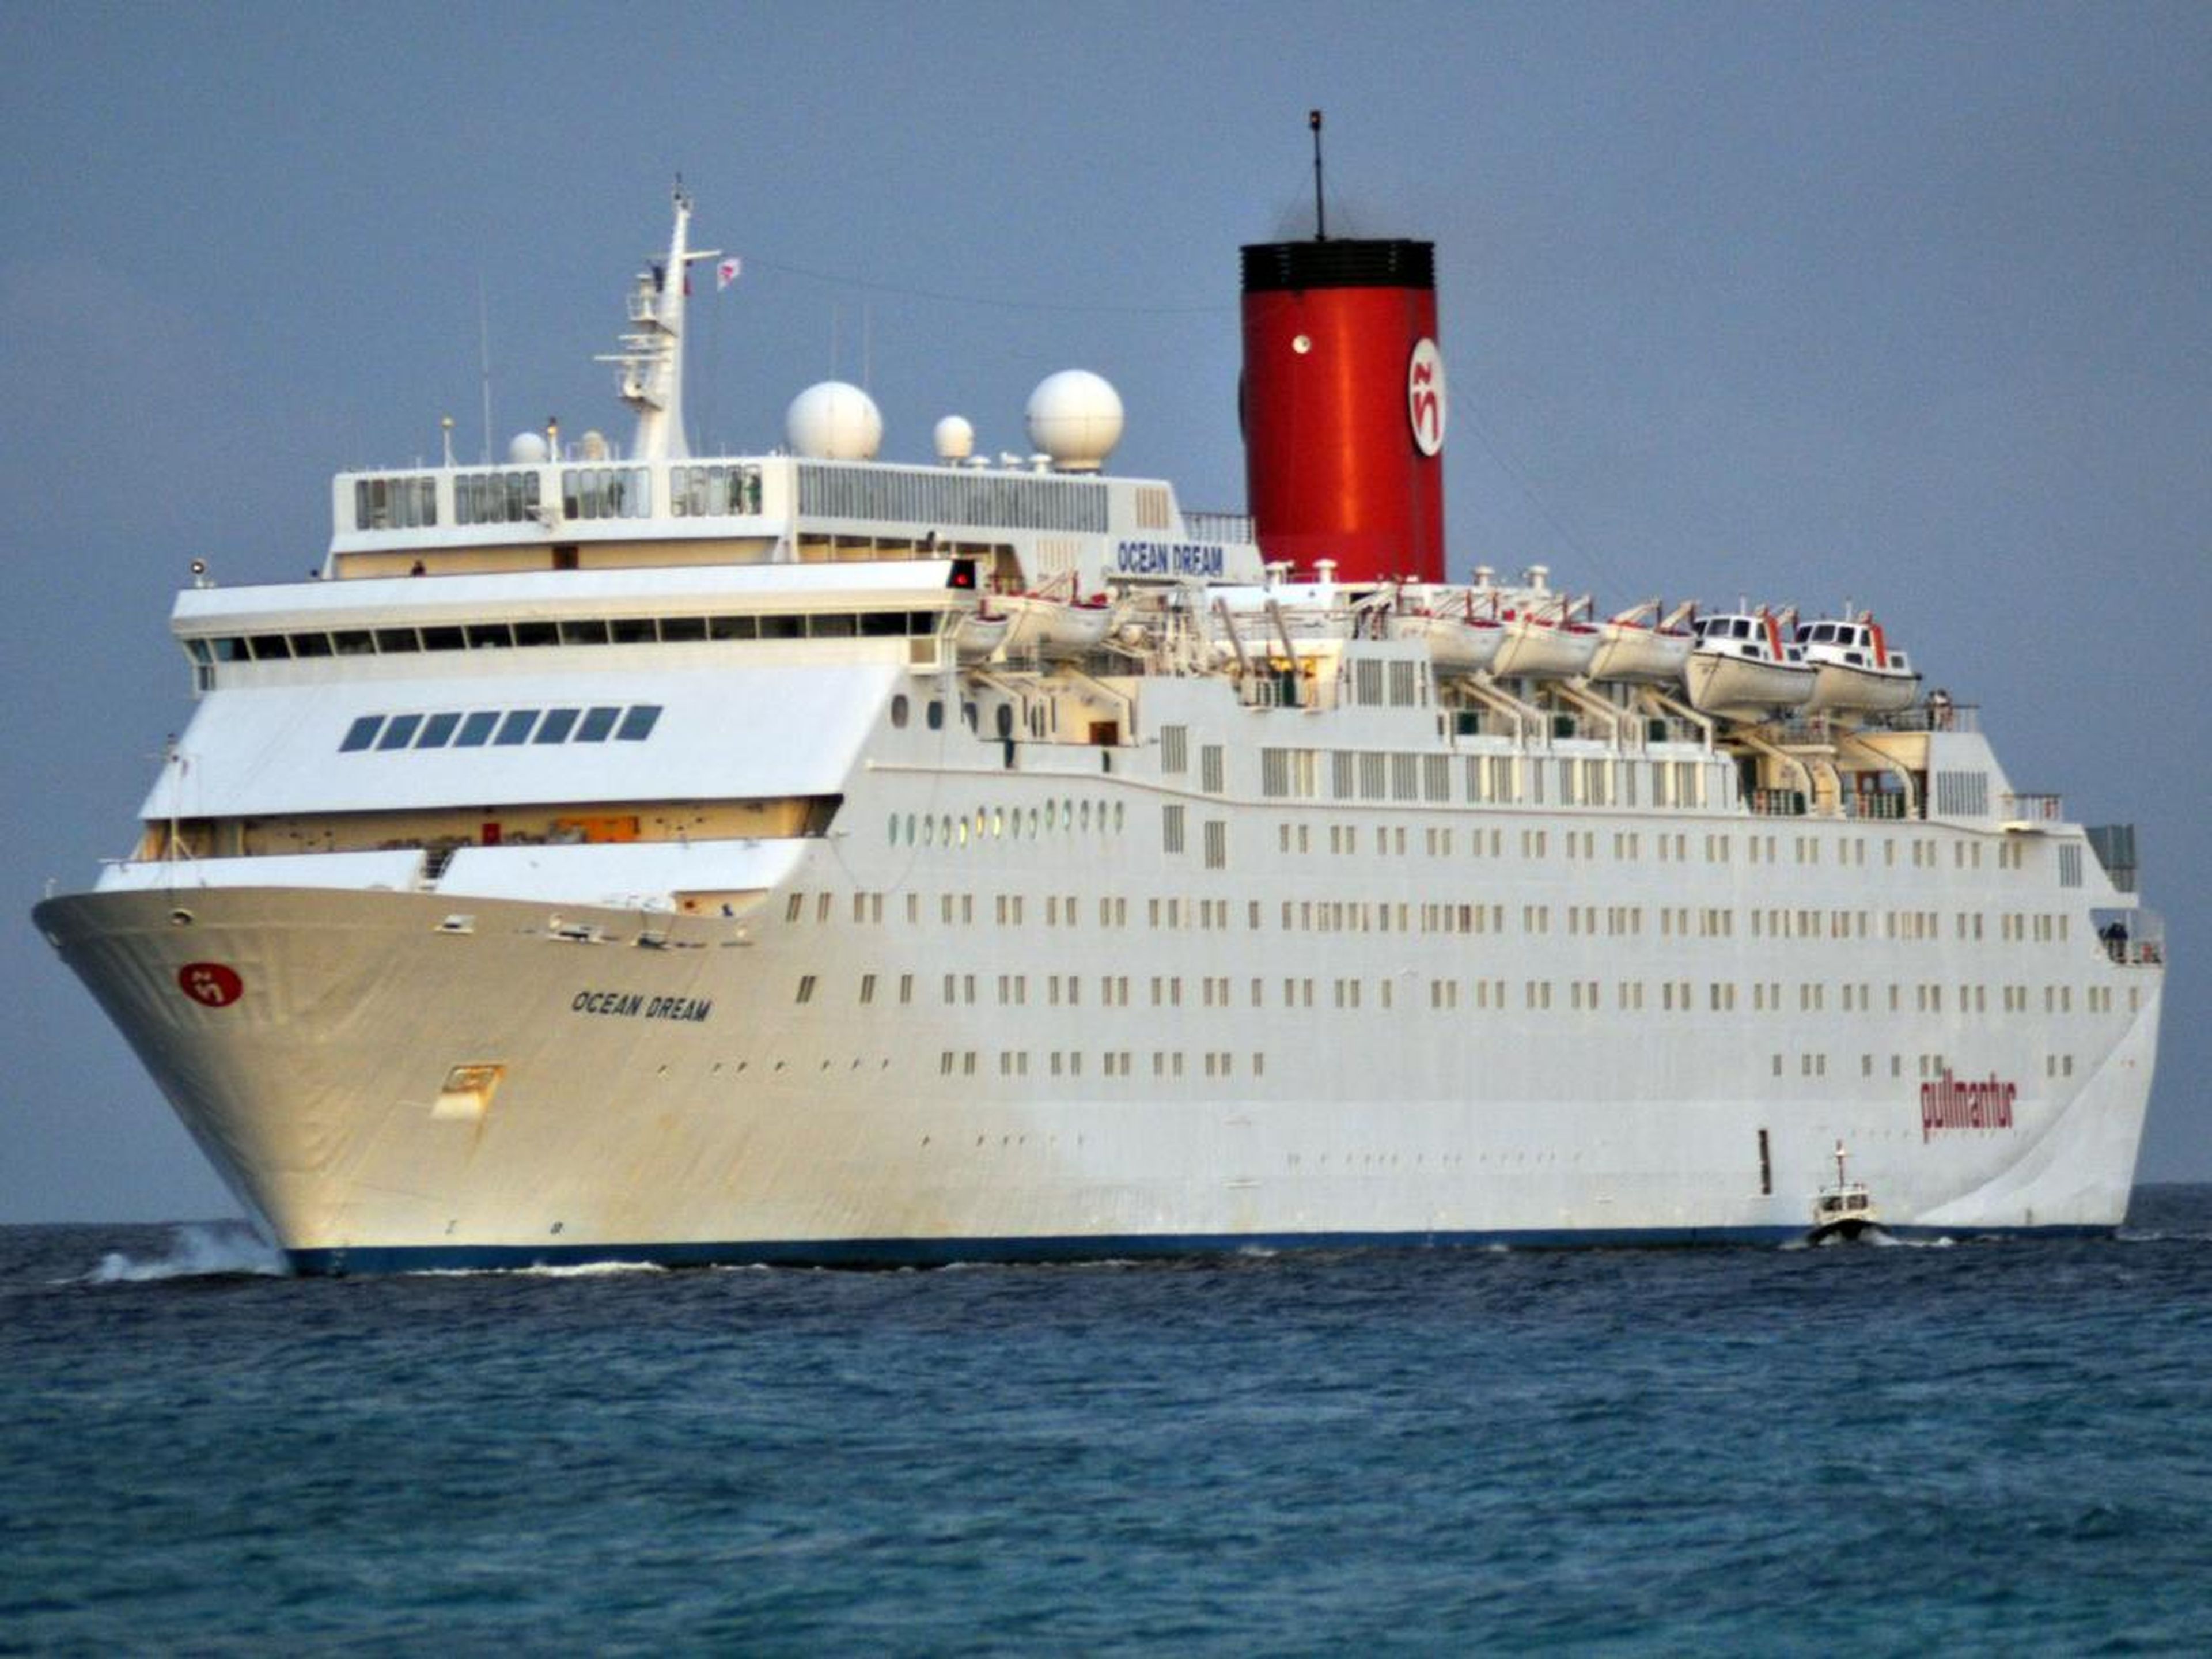 The cruise ship Ocean Dream in 2009, before it was owned by Maritime Holdings Group.